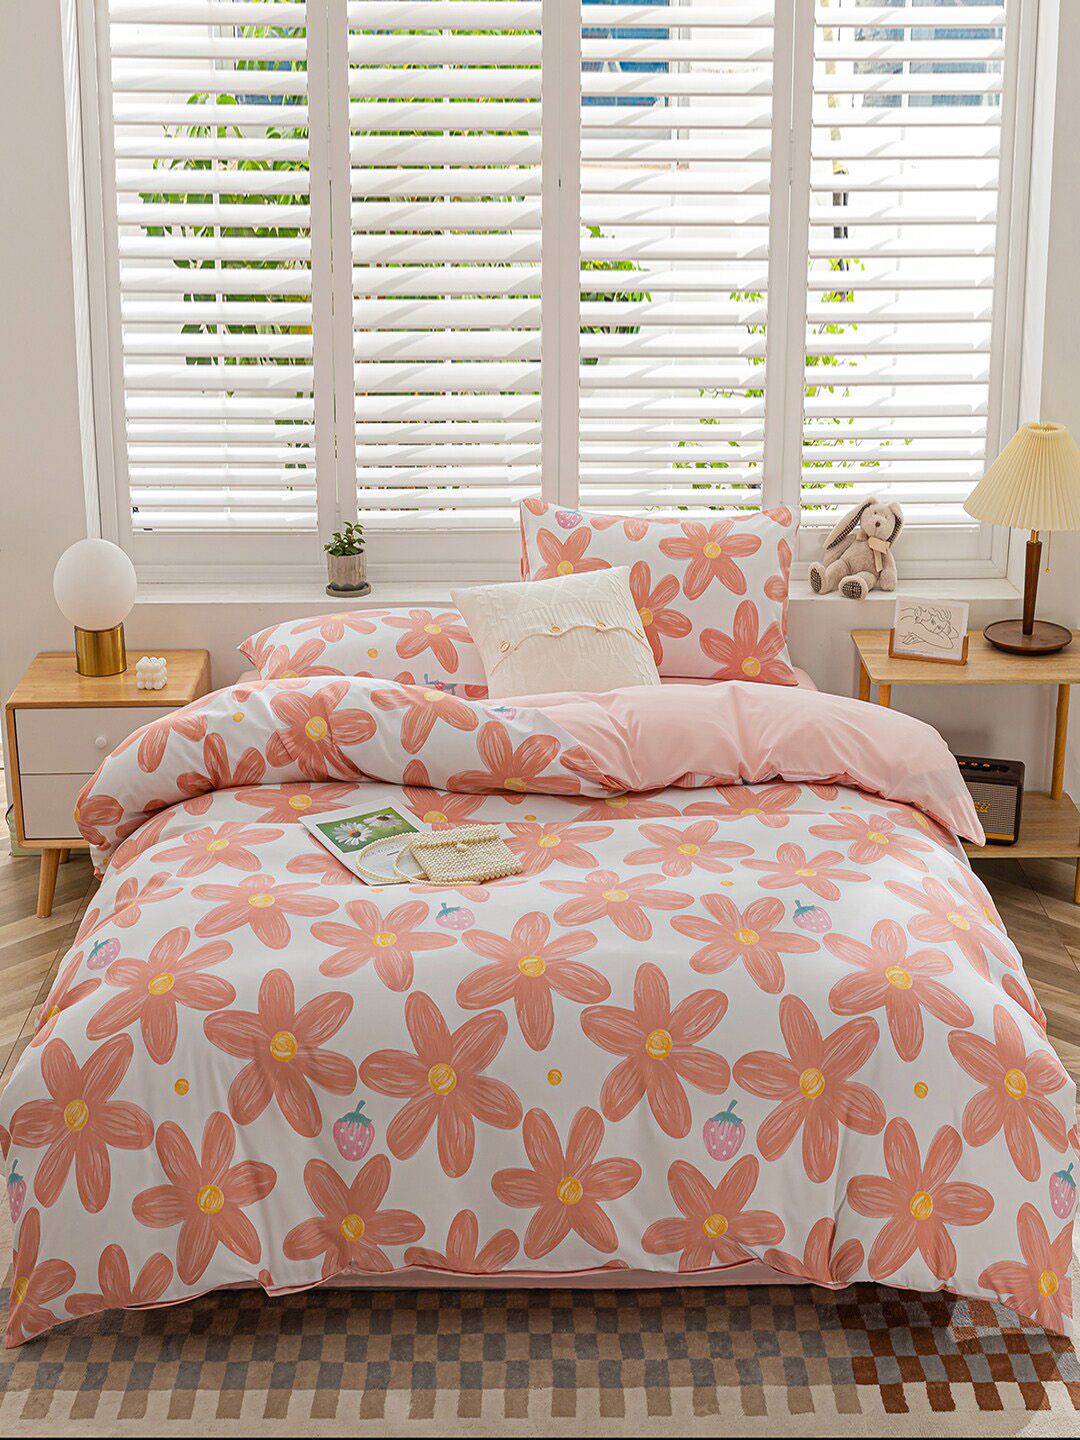 JC Collection Pink & White Printed Double Queen Bedding Set Price in India